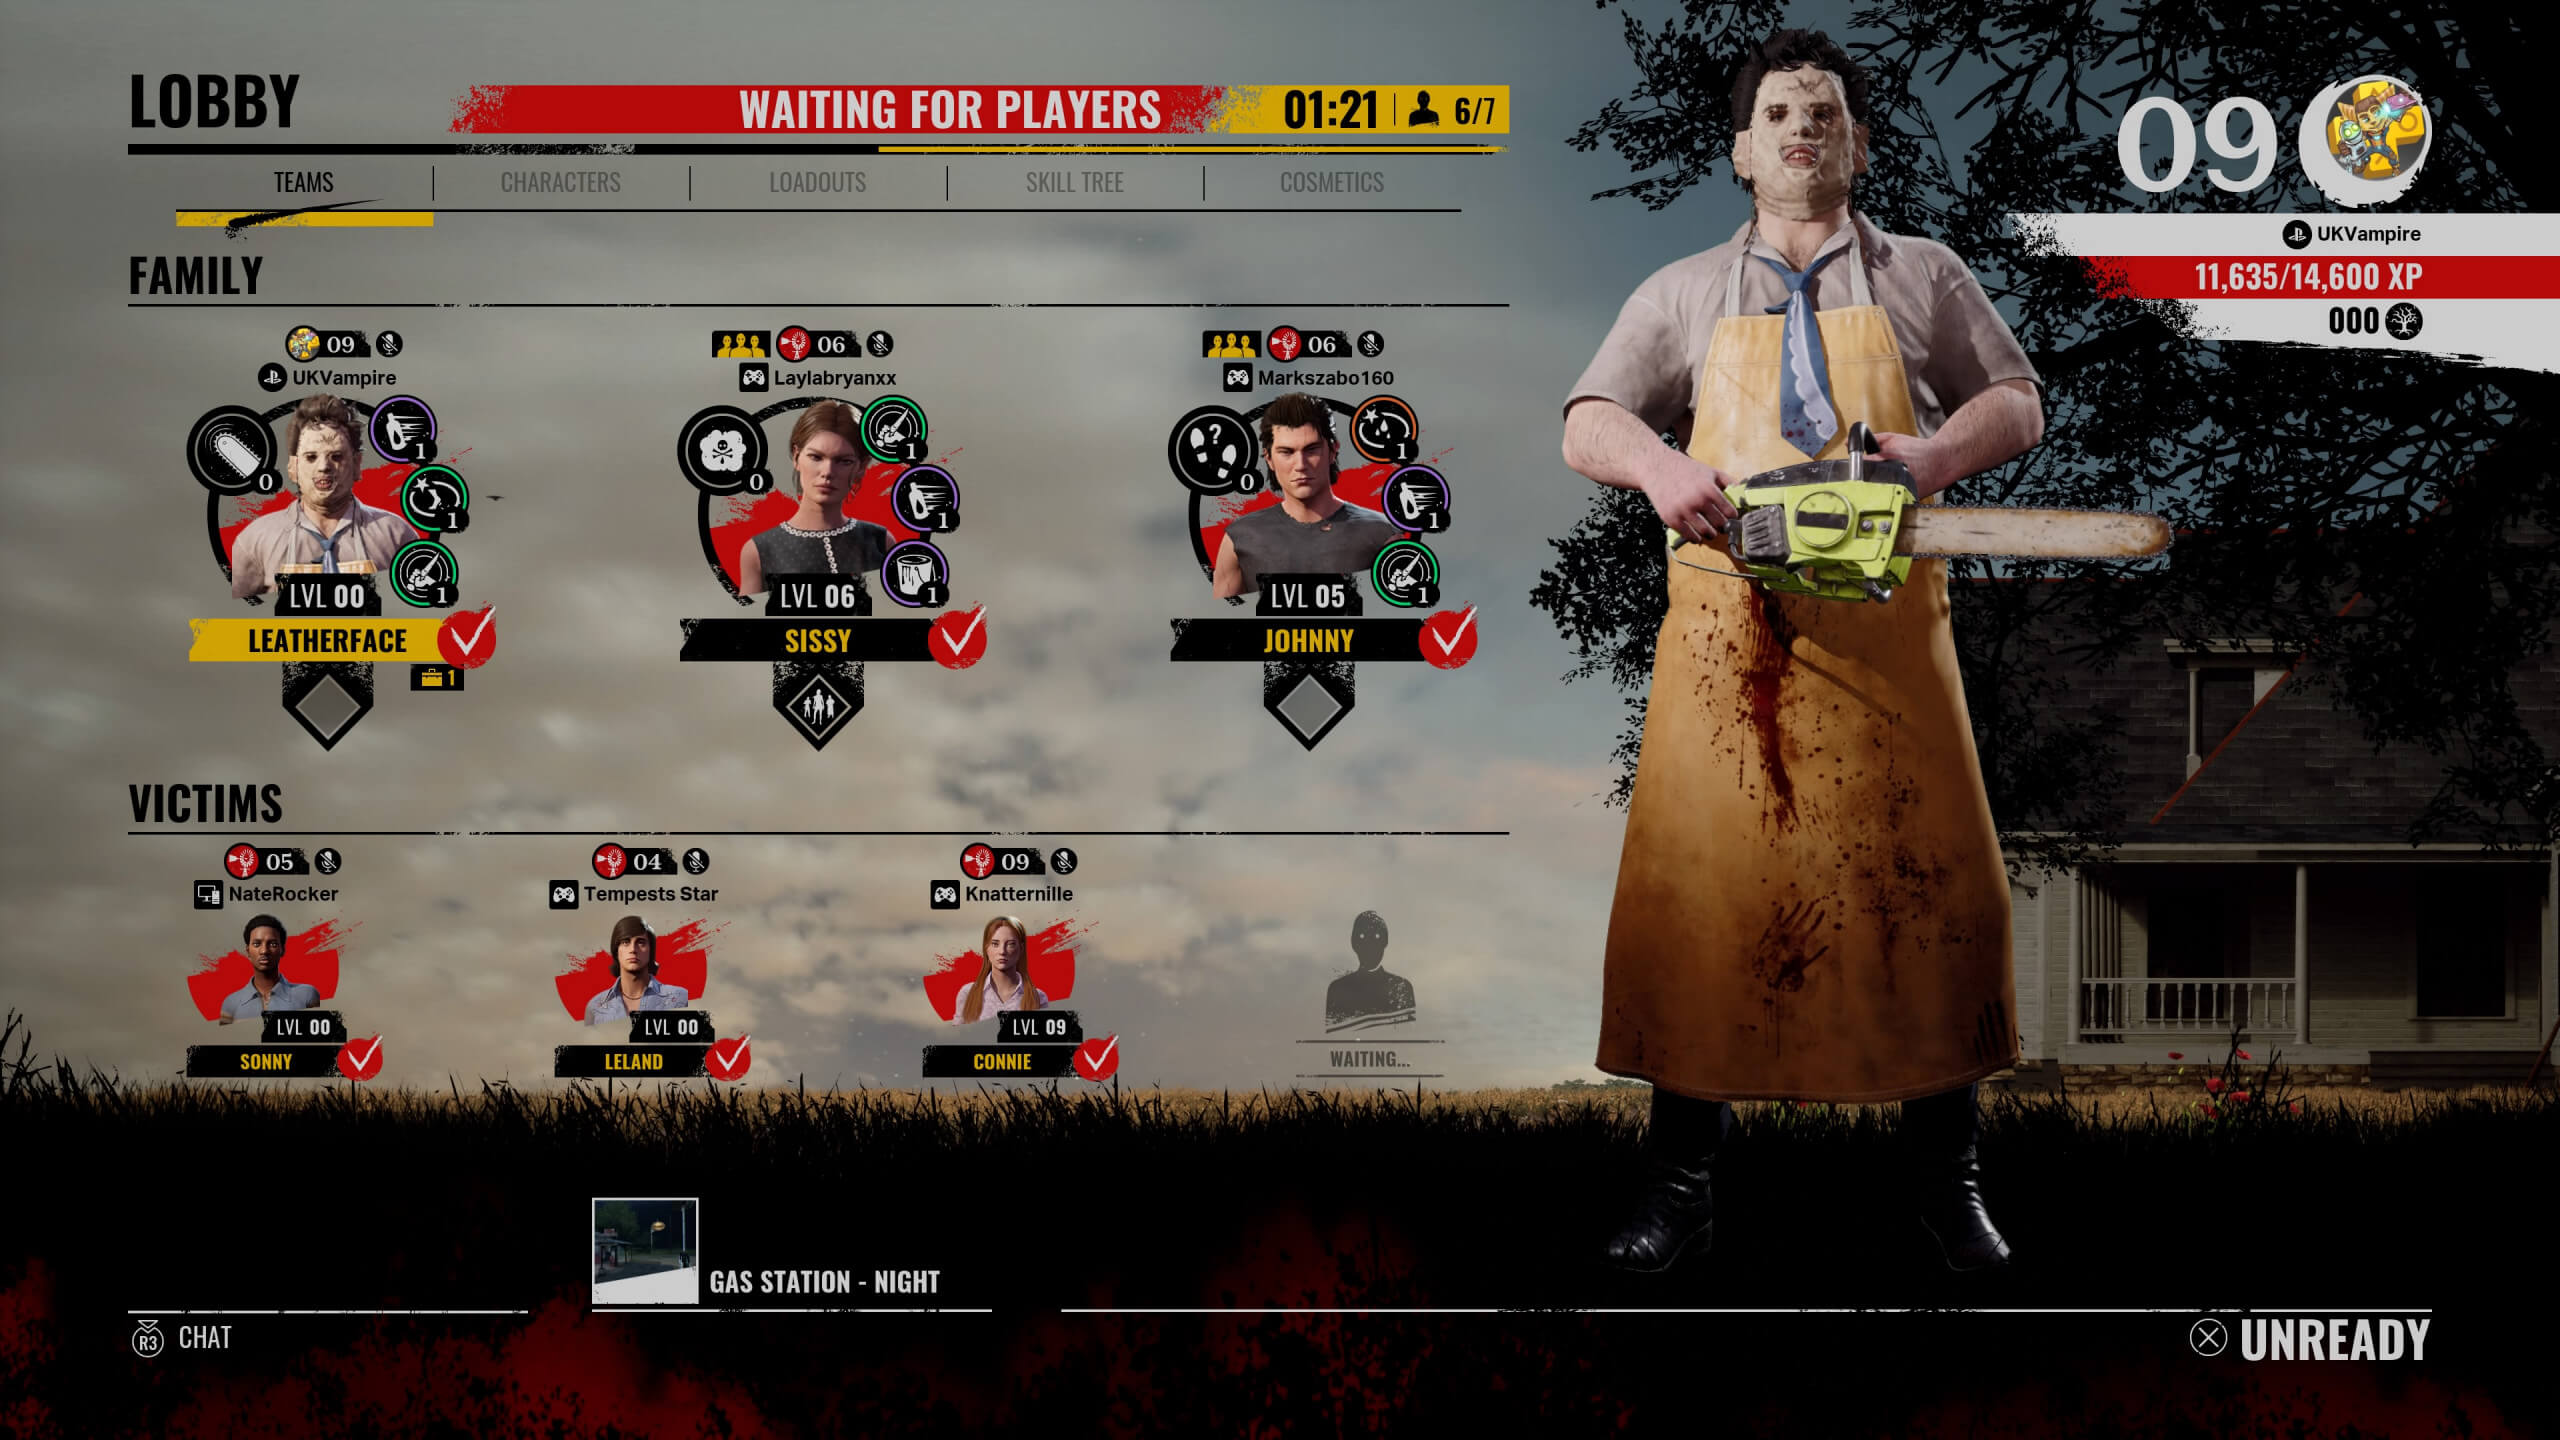 The ingame Lobby showing the family members aswell as 3 of the 4 victims. Highlighted is Leatherface with his chainsaw from the movie.